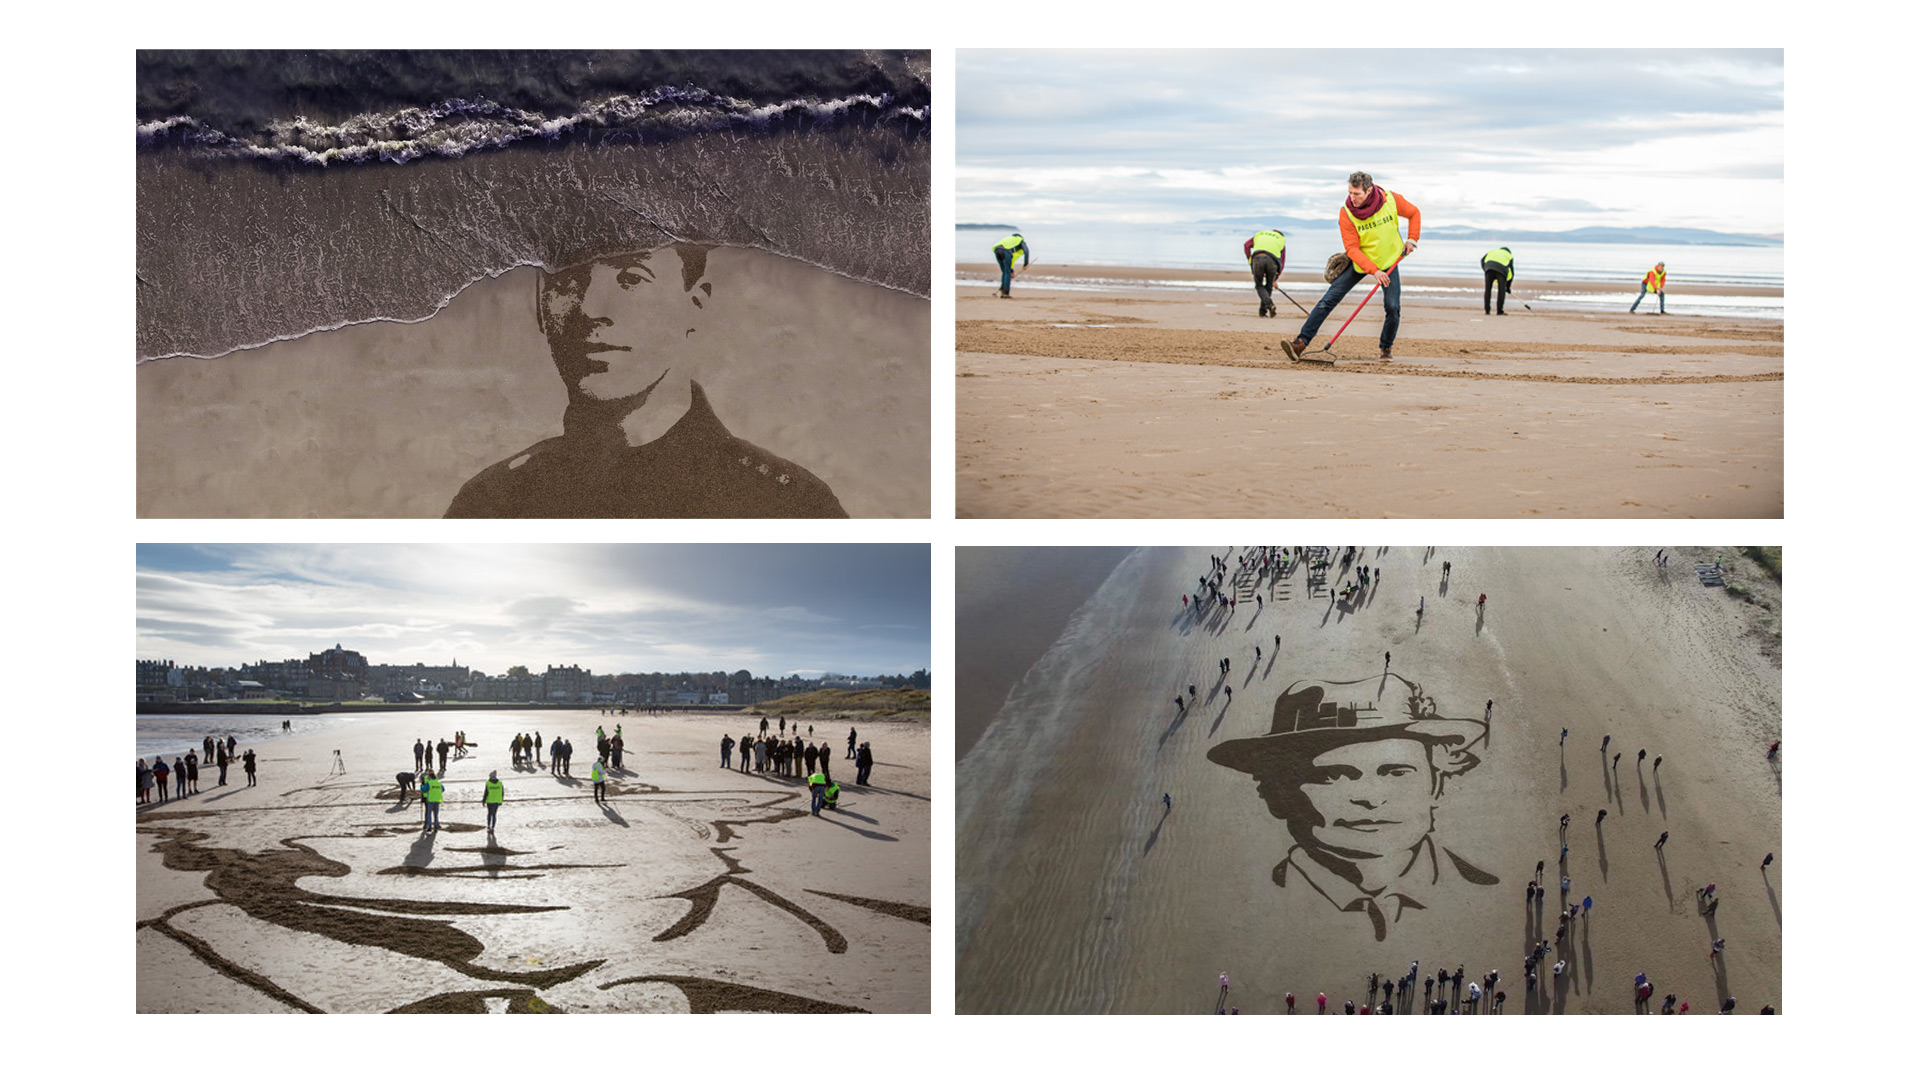 Images showing people creating art on the beaches